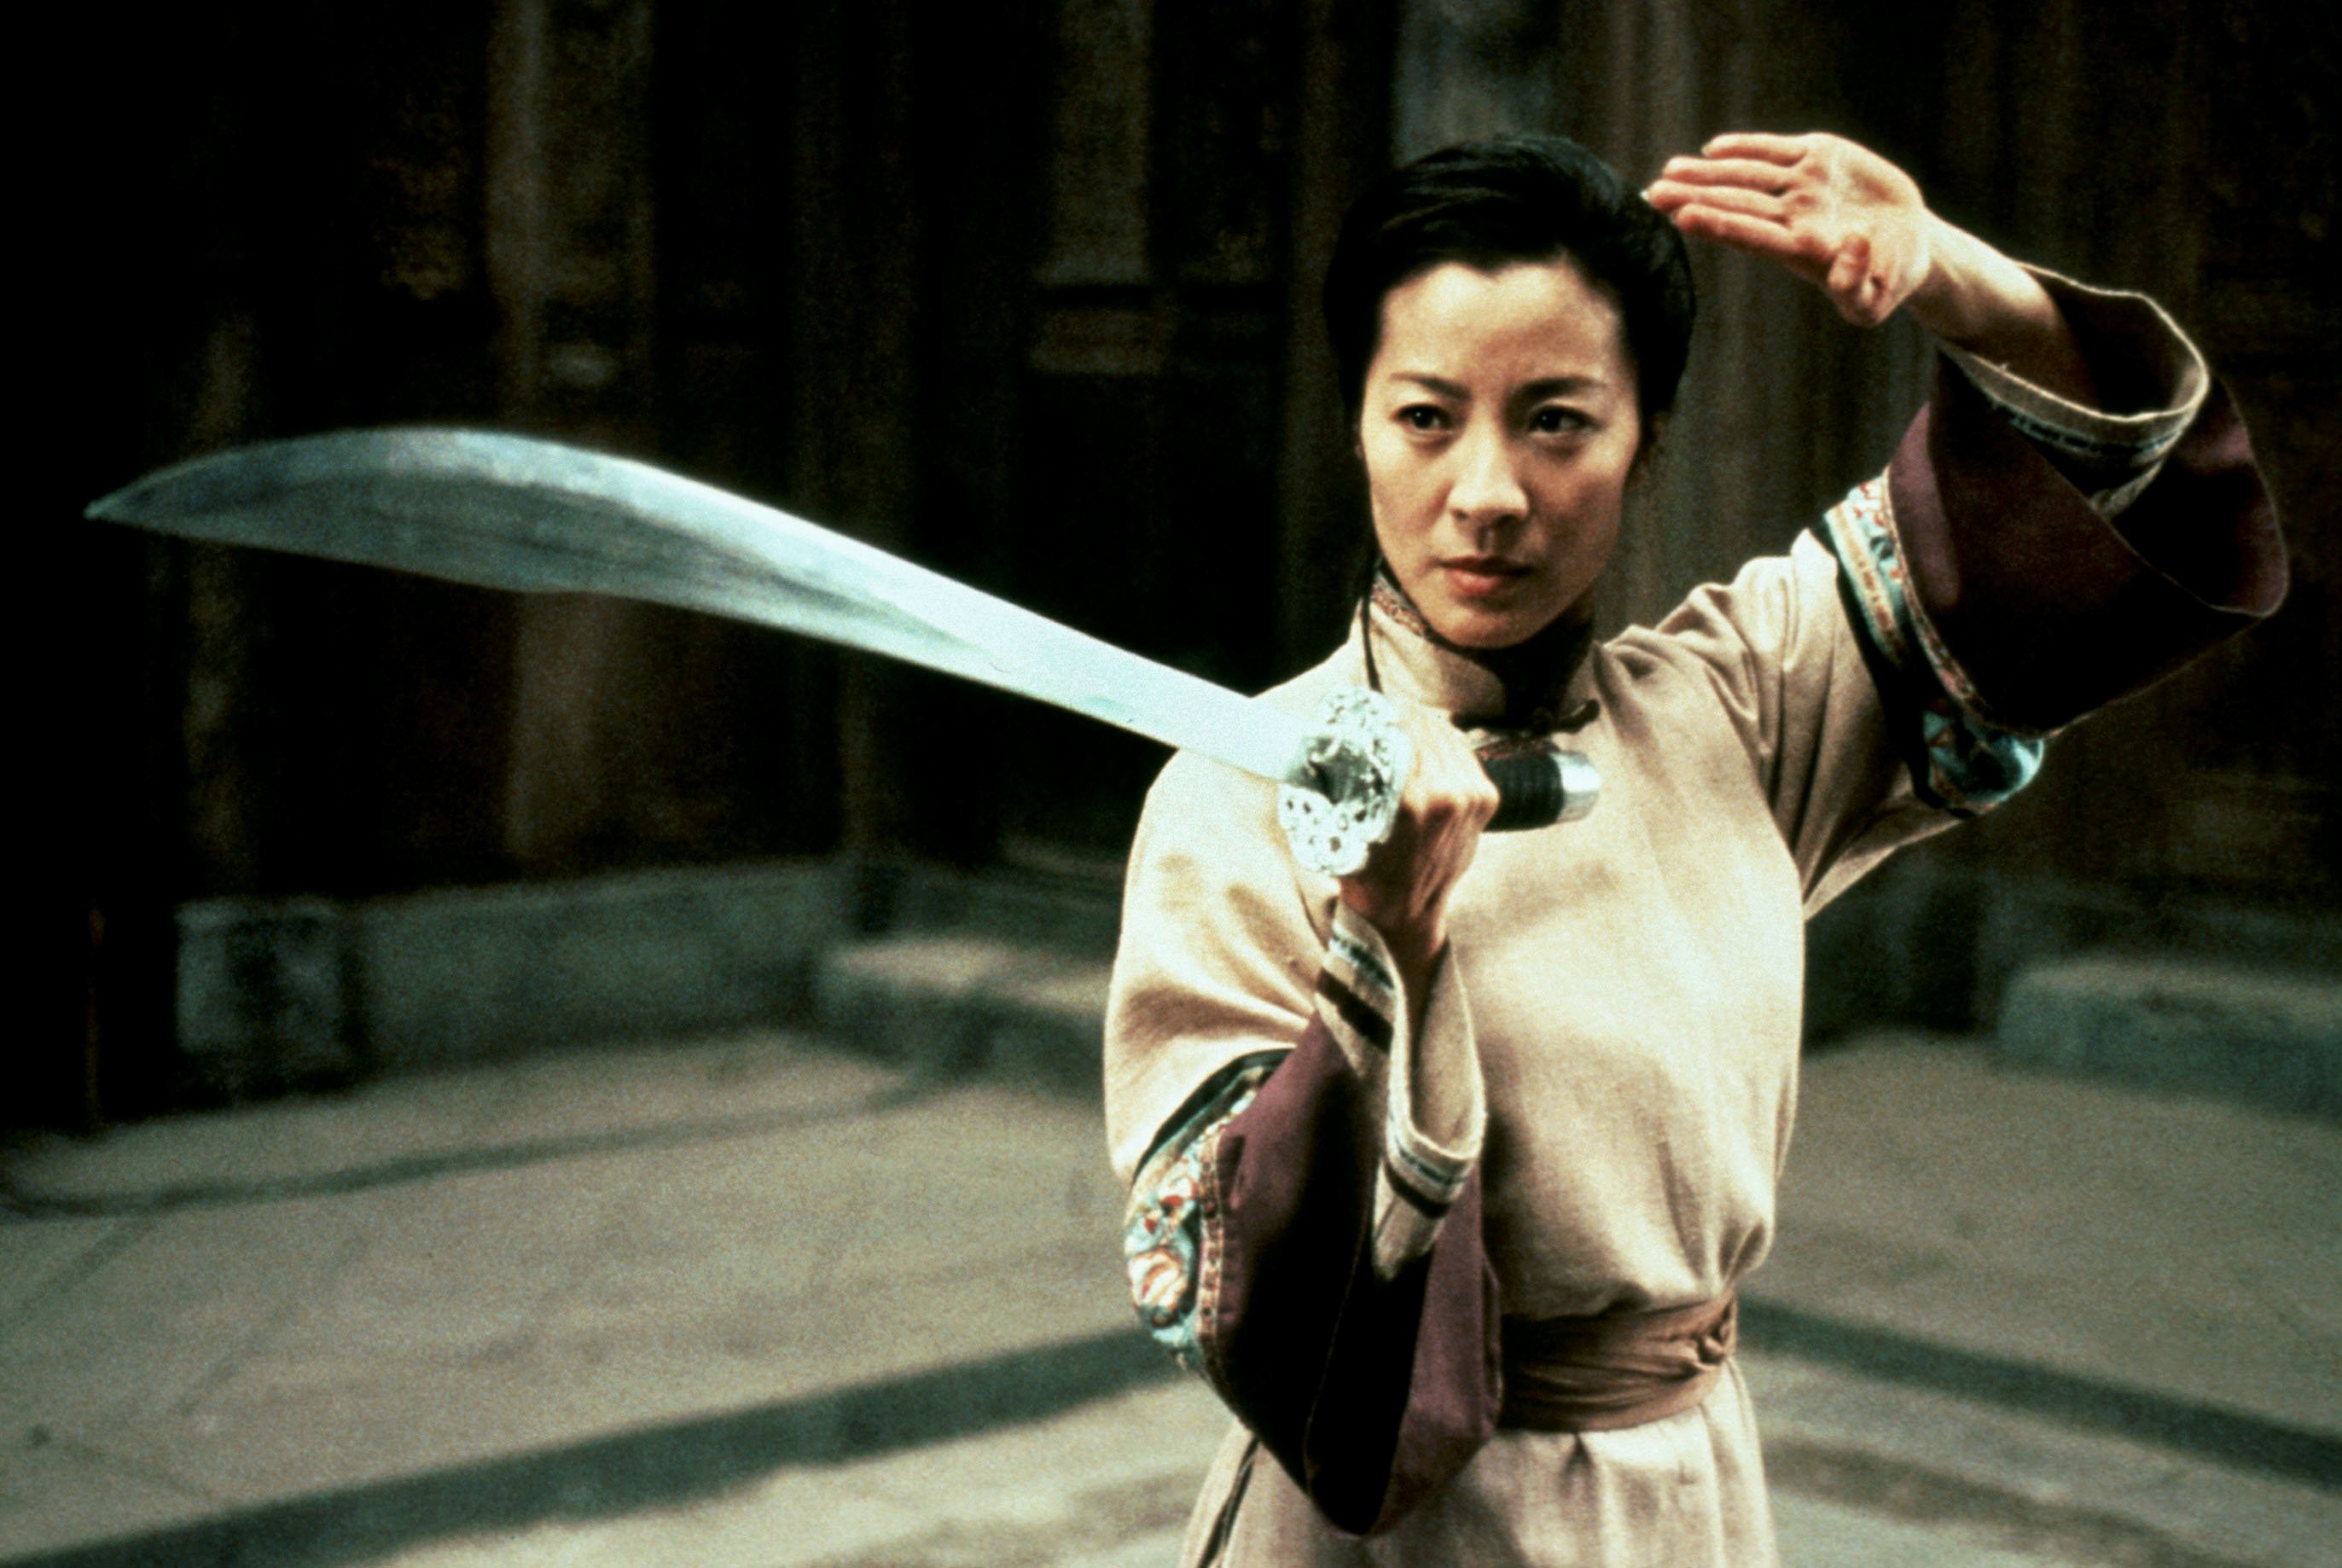 Crouching Tiger, Hidden Dragon Backgrounds, Compatible - PC, Mobile, Gadgets| 2745x1838 px